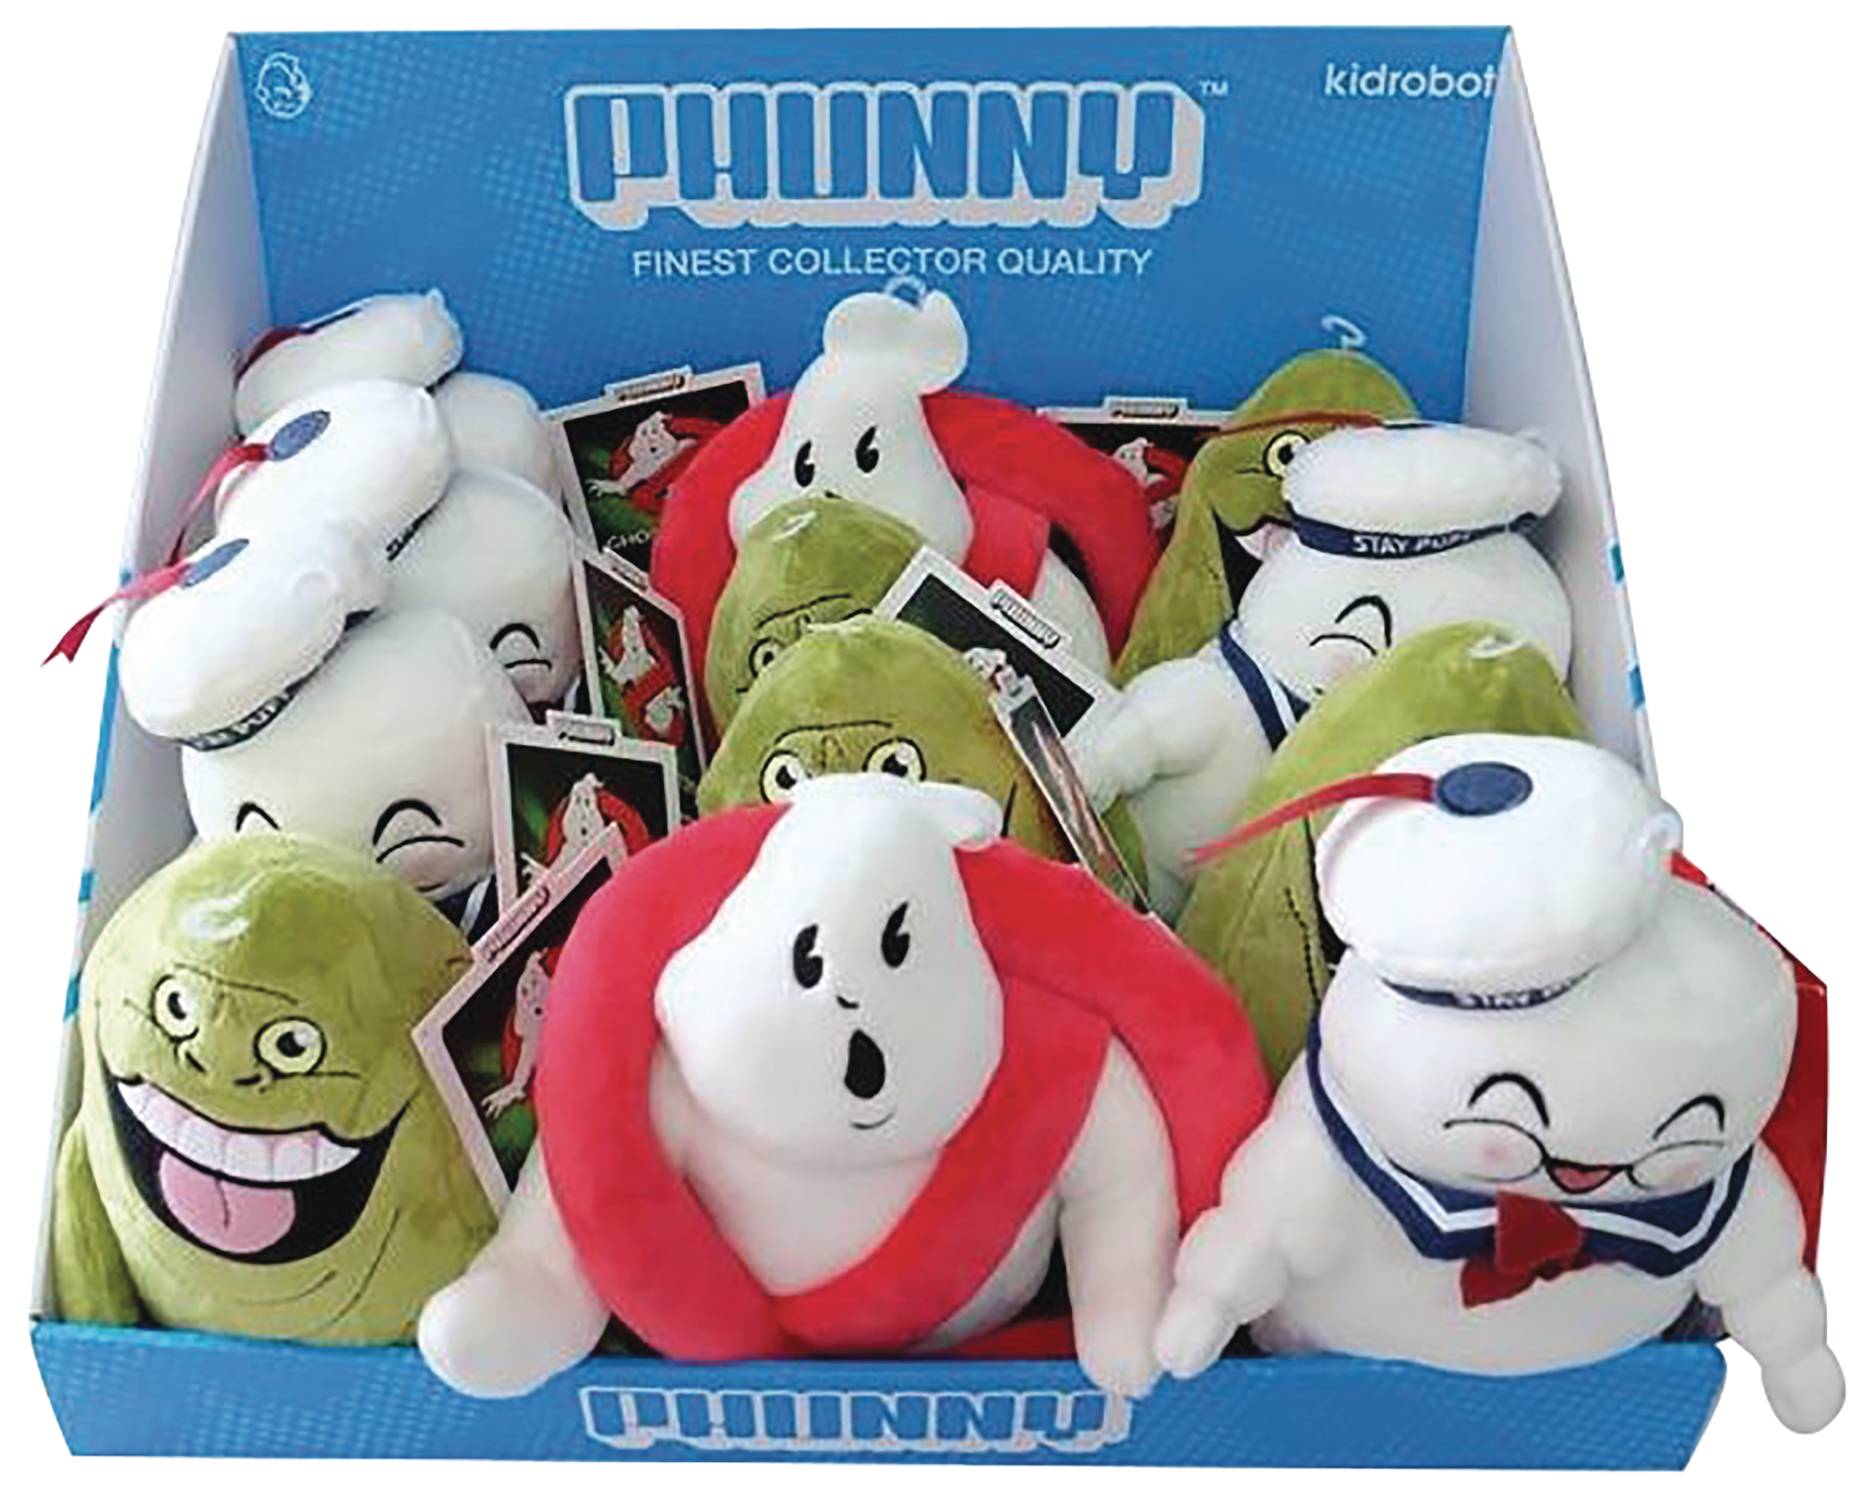 Ghostbusters 8" Phunny Plush "No Ghost" Logo 